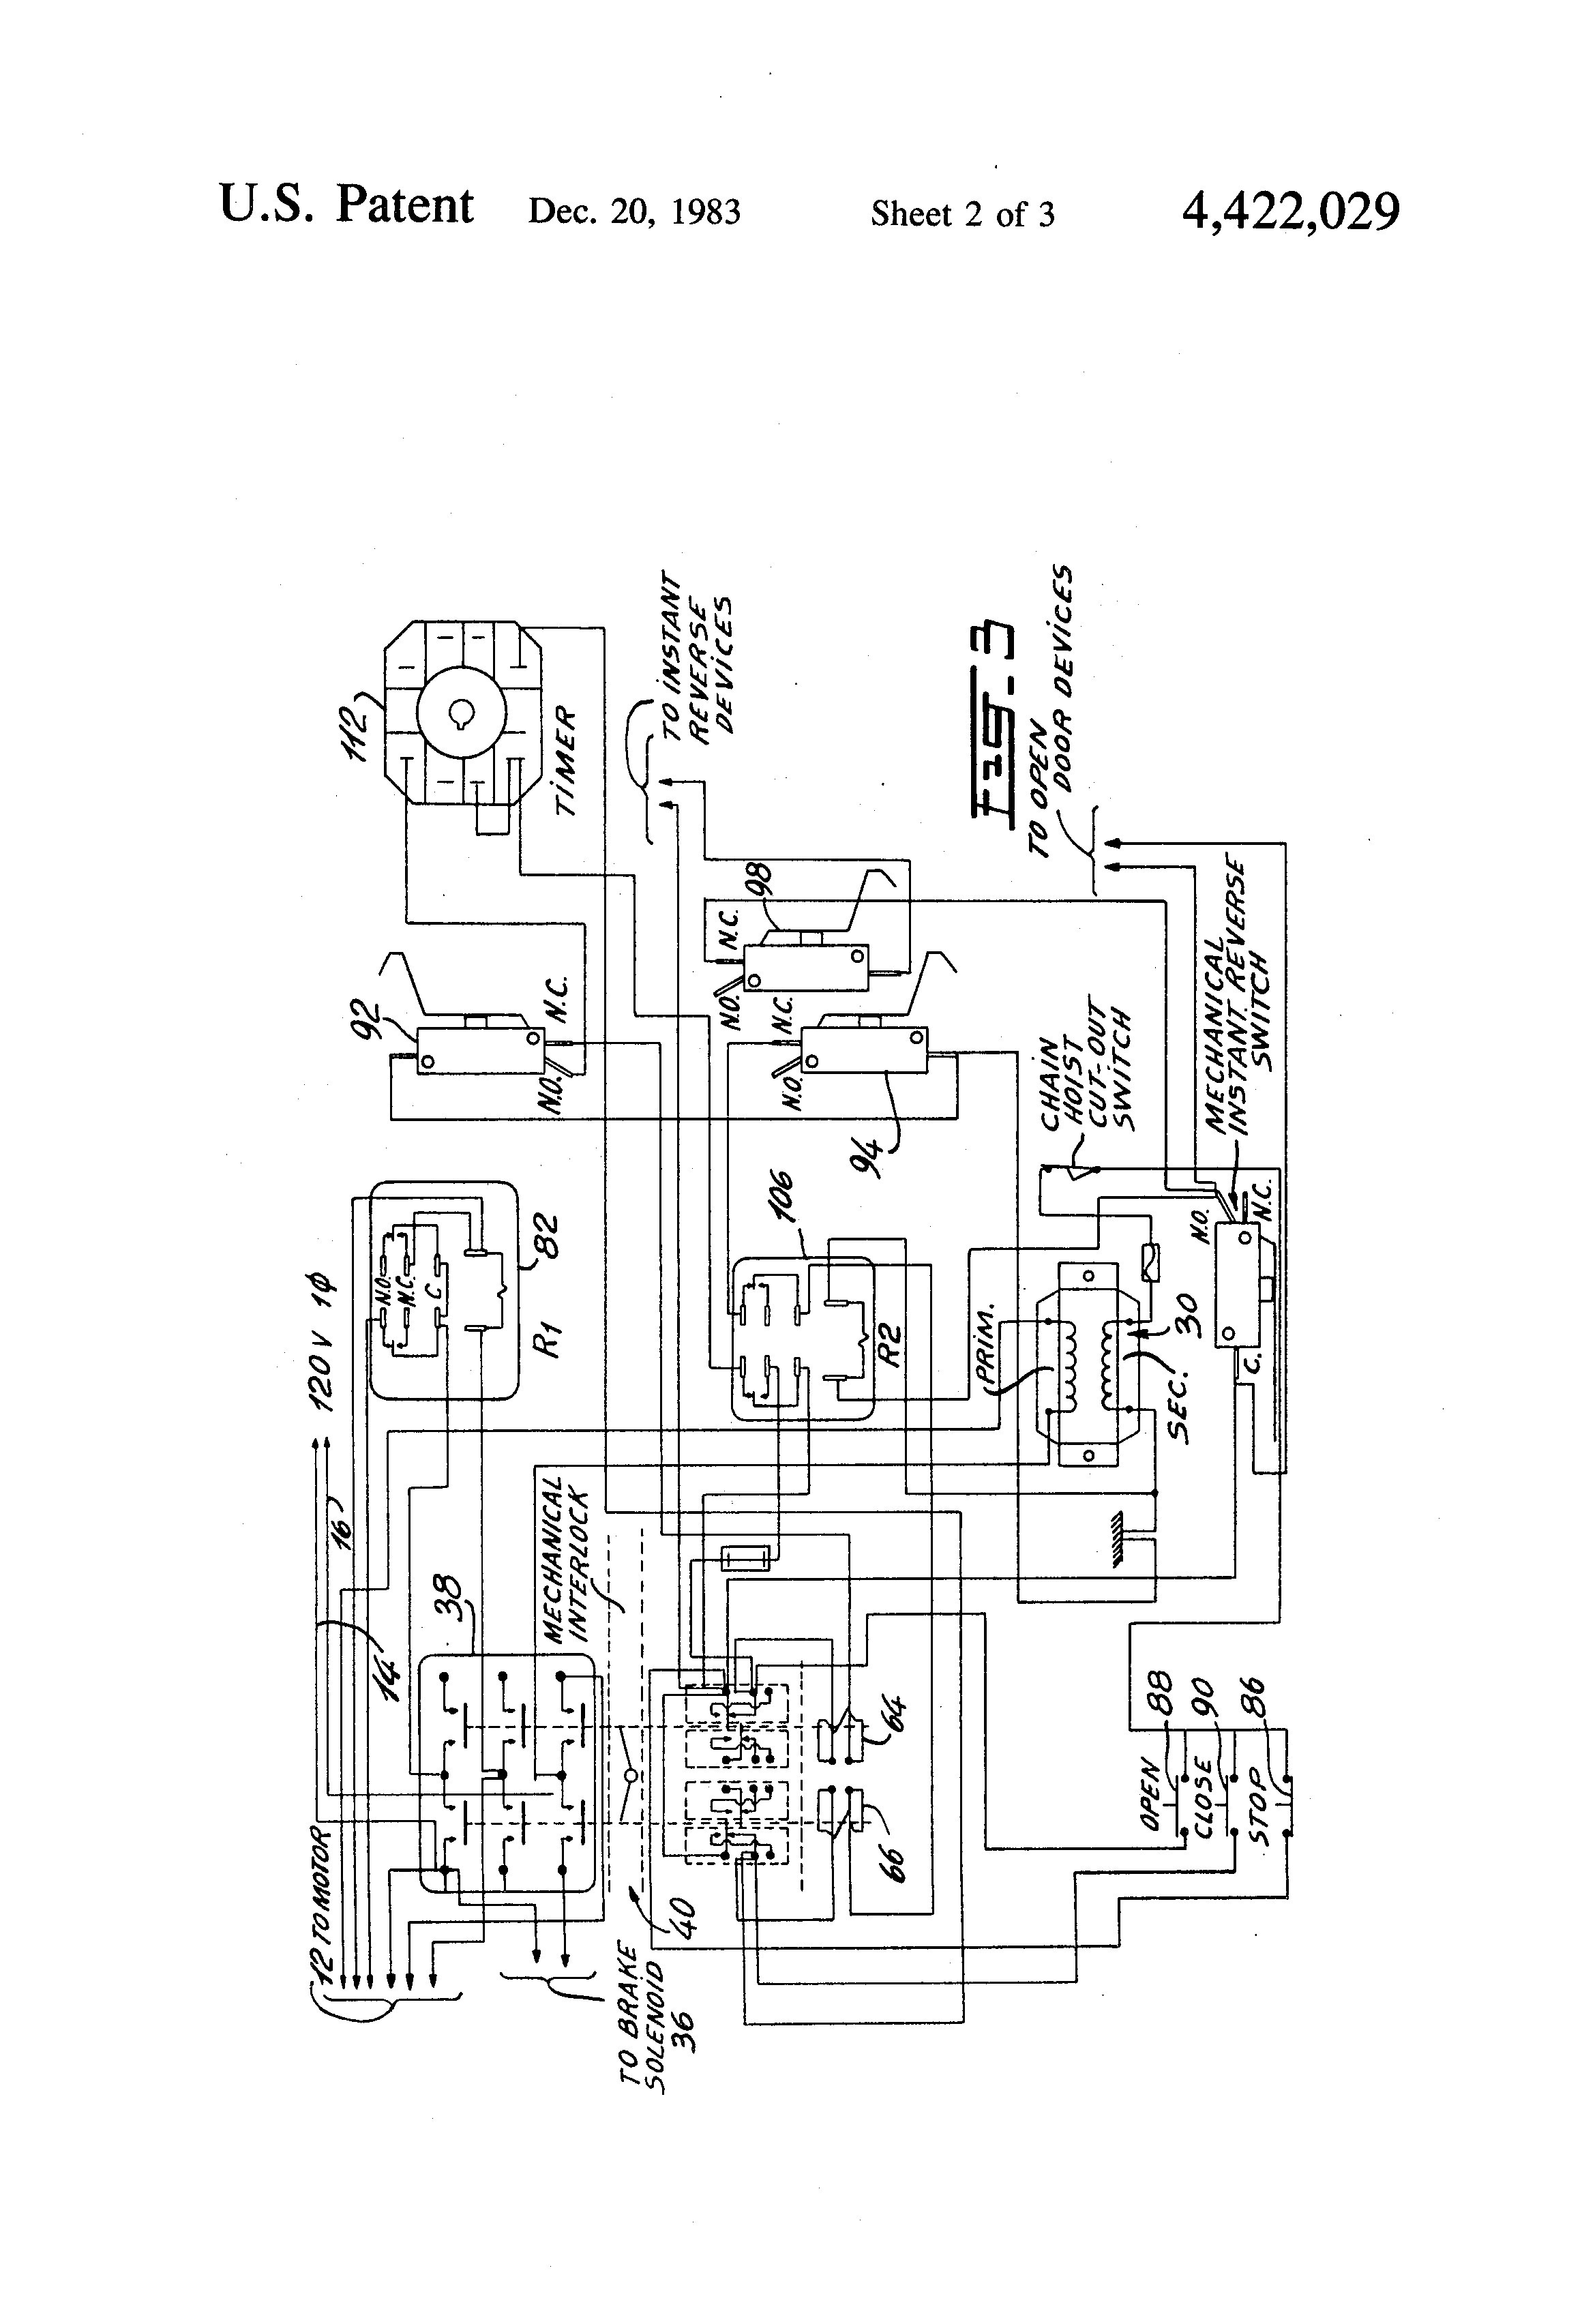 Wiring Diagram Electric Motor Reverse New 240 Volt Single Phase Wiring Diagram New Electric Motor Single